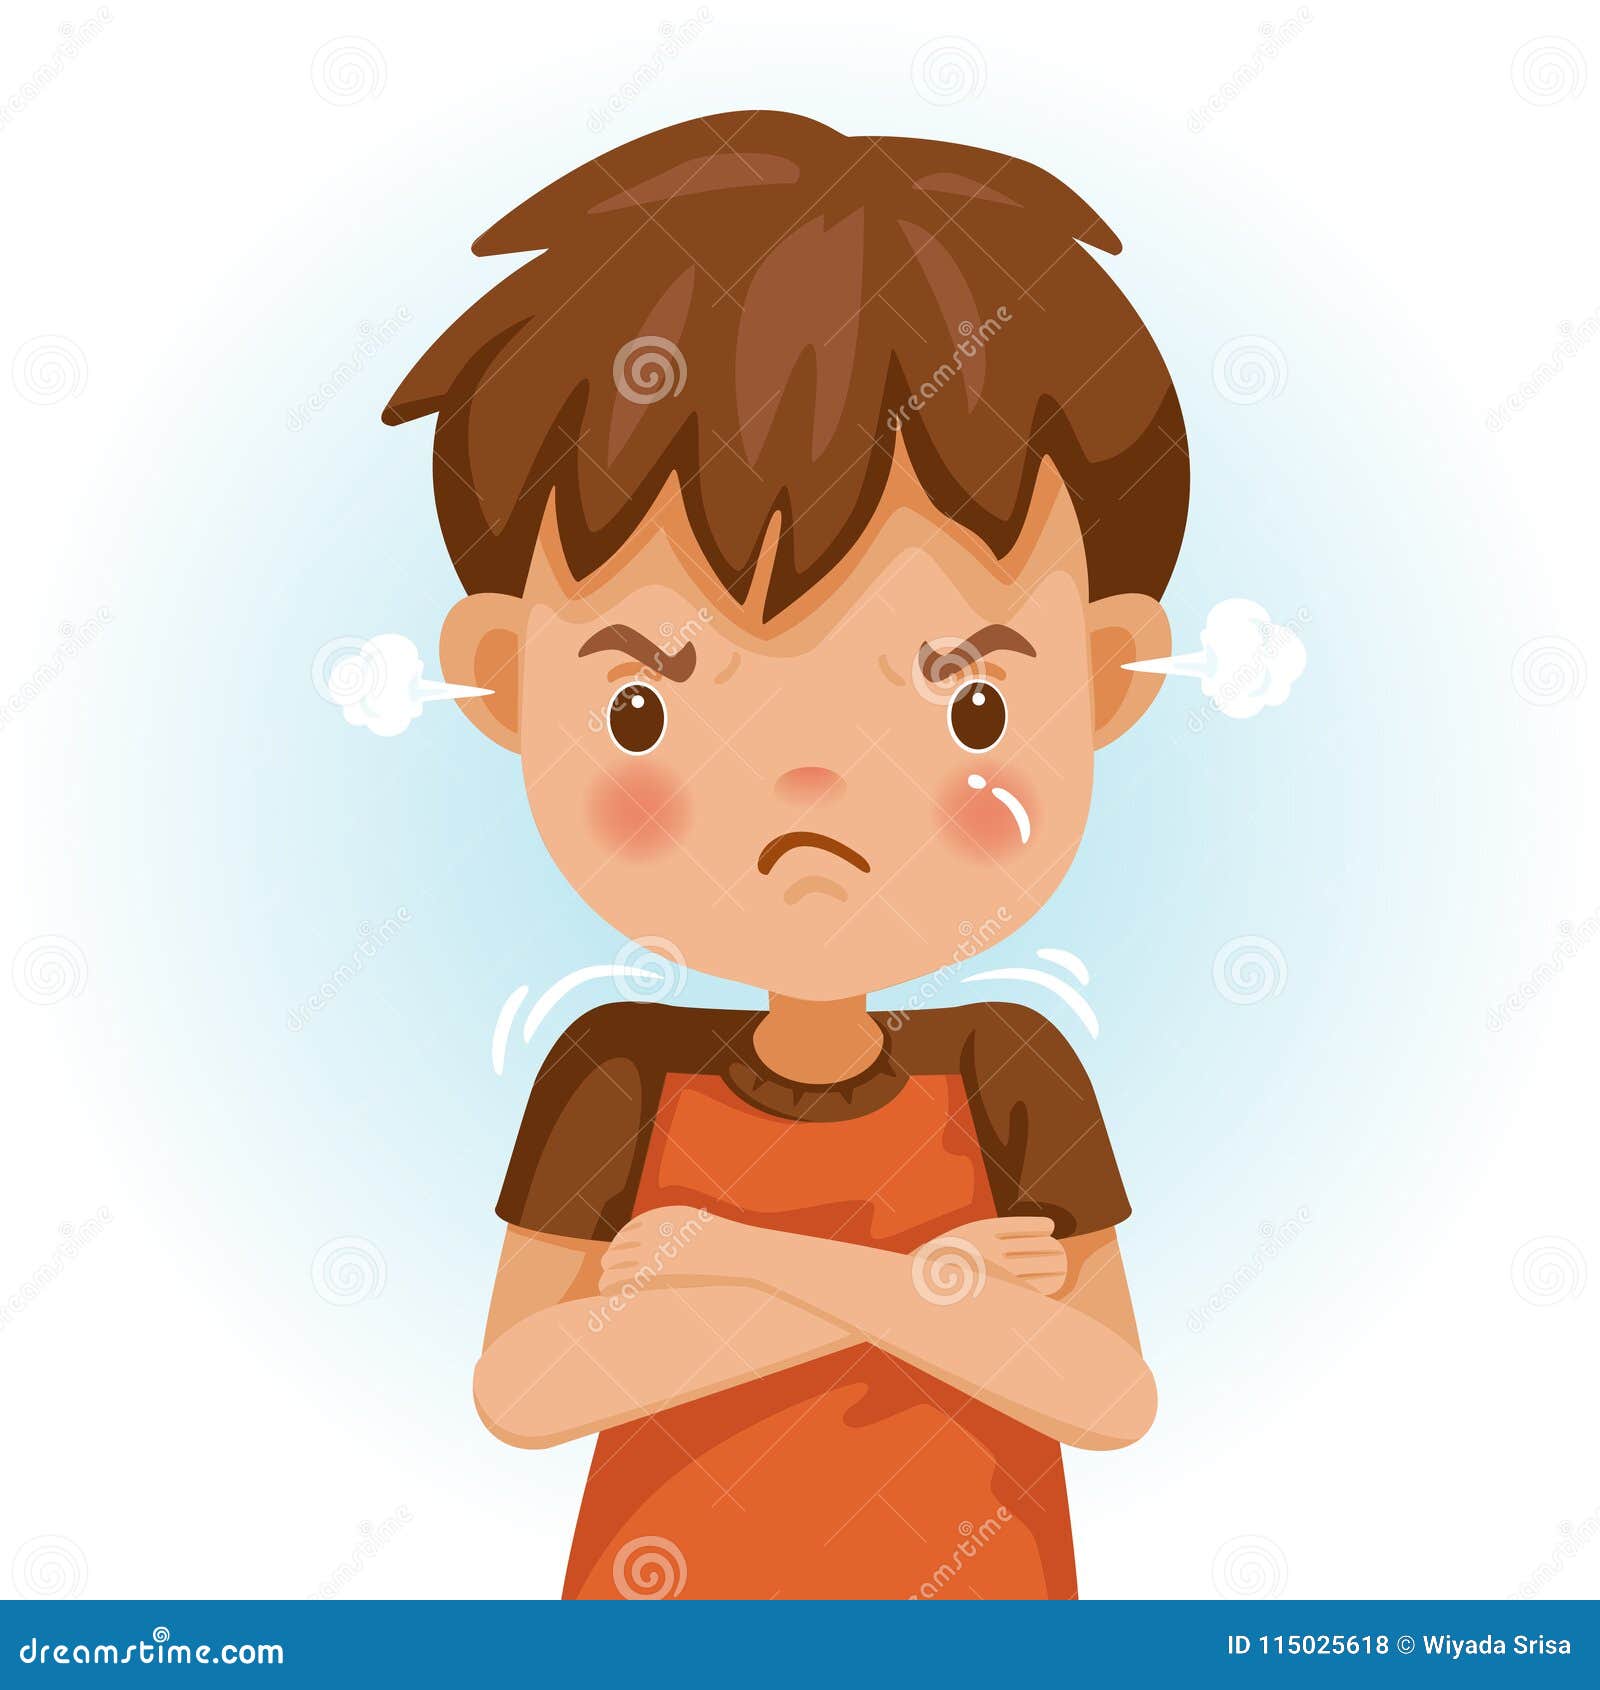 angry-child-boy-red-shirt-expressing-anger-excitement-frown-cartoon-characters-vector-illustrations-isolated-115025618.jpg